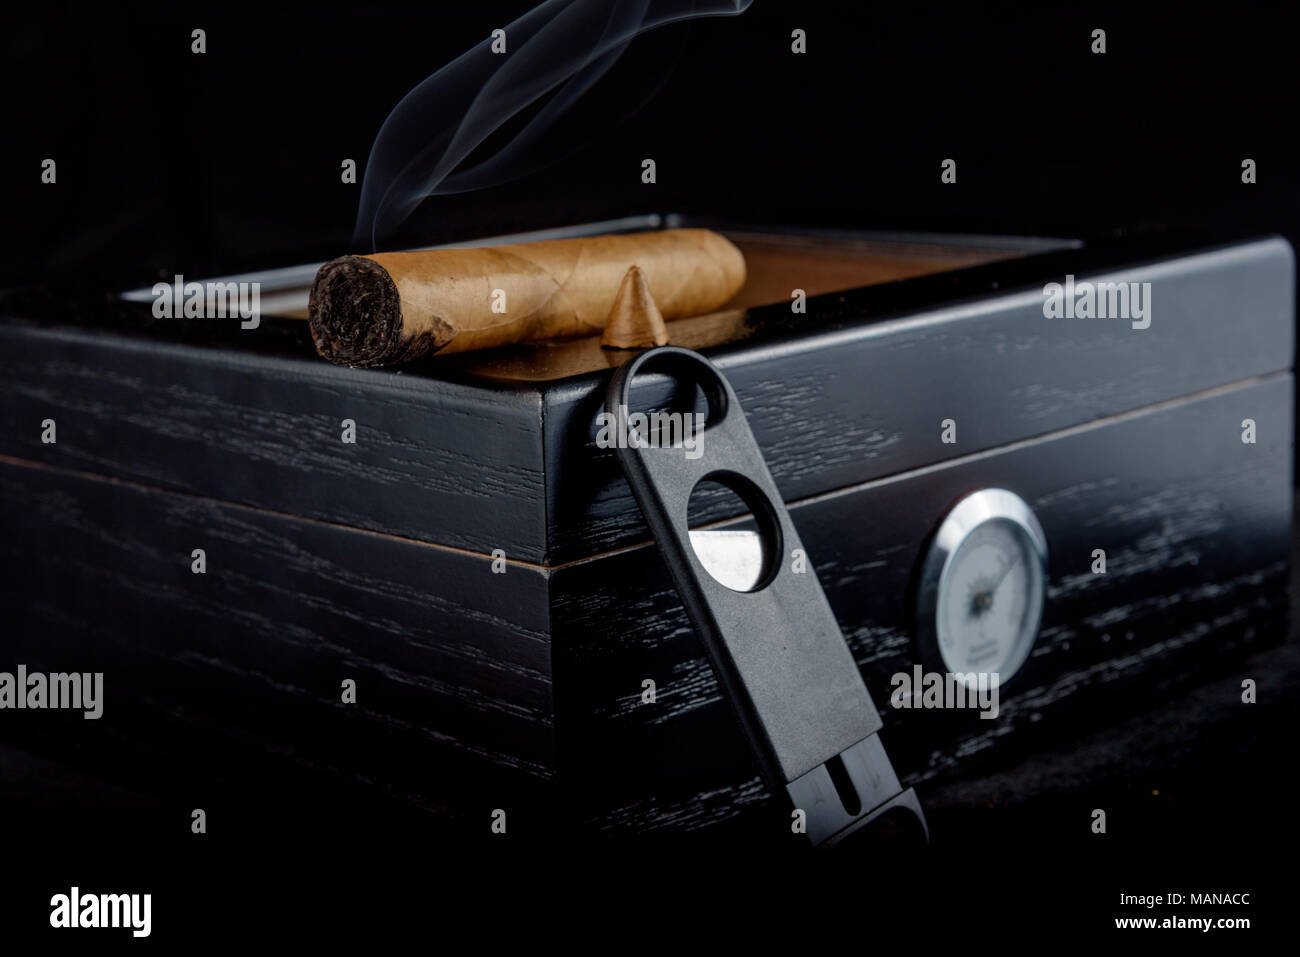 A rich smelling cigar that has been straight cut with smoke rising. Resting on a black humidor next to a straight cigar cutter. Black background Stock Photo